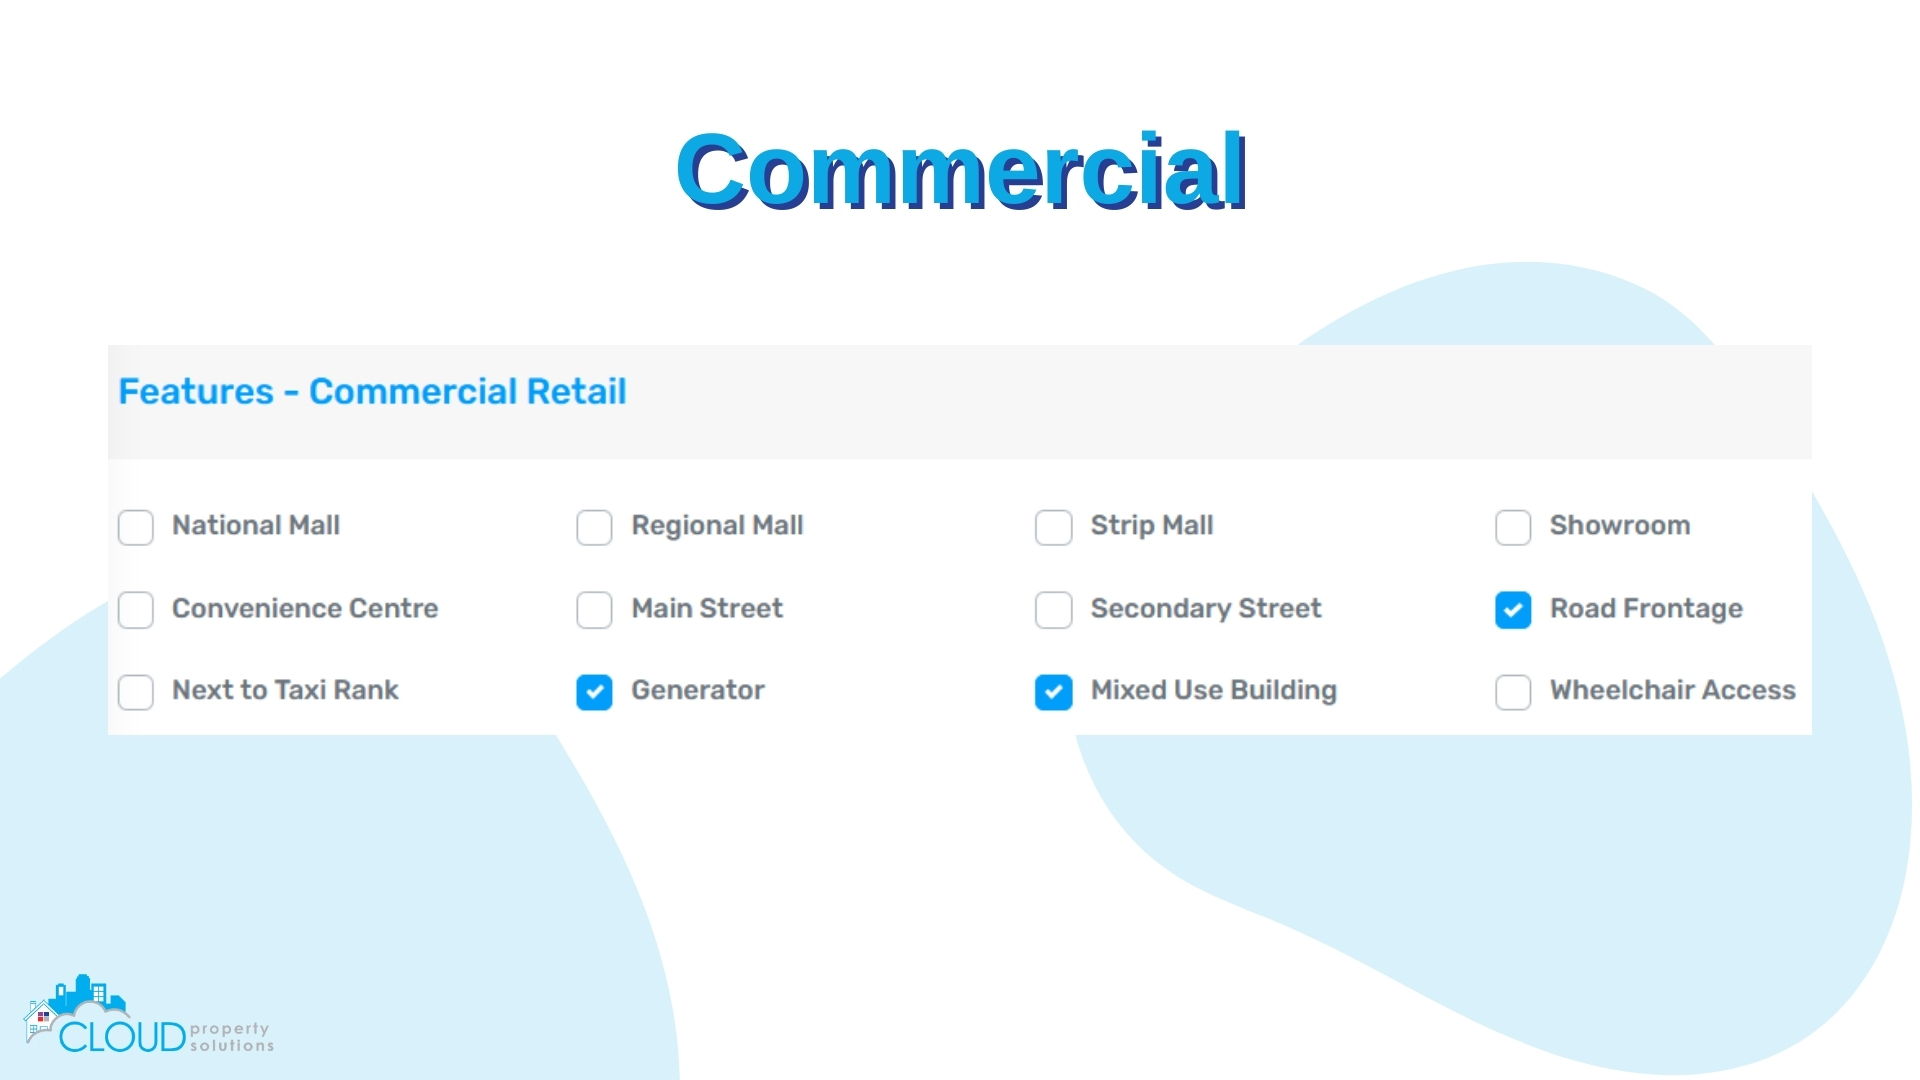 These features are available for all commercial property listings